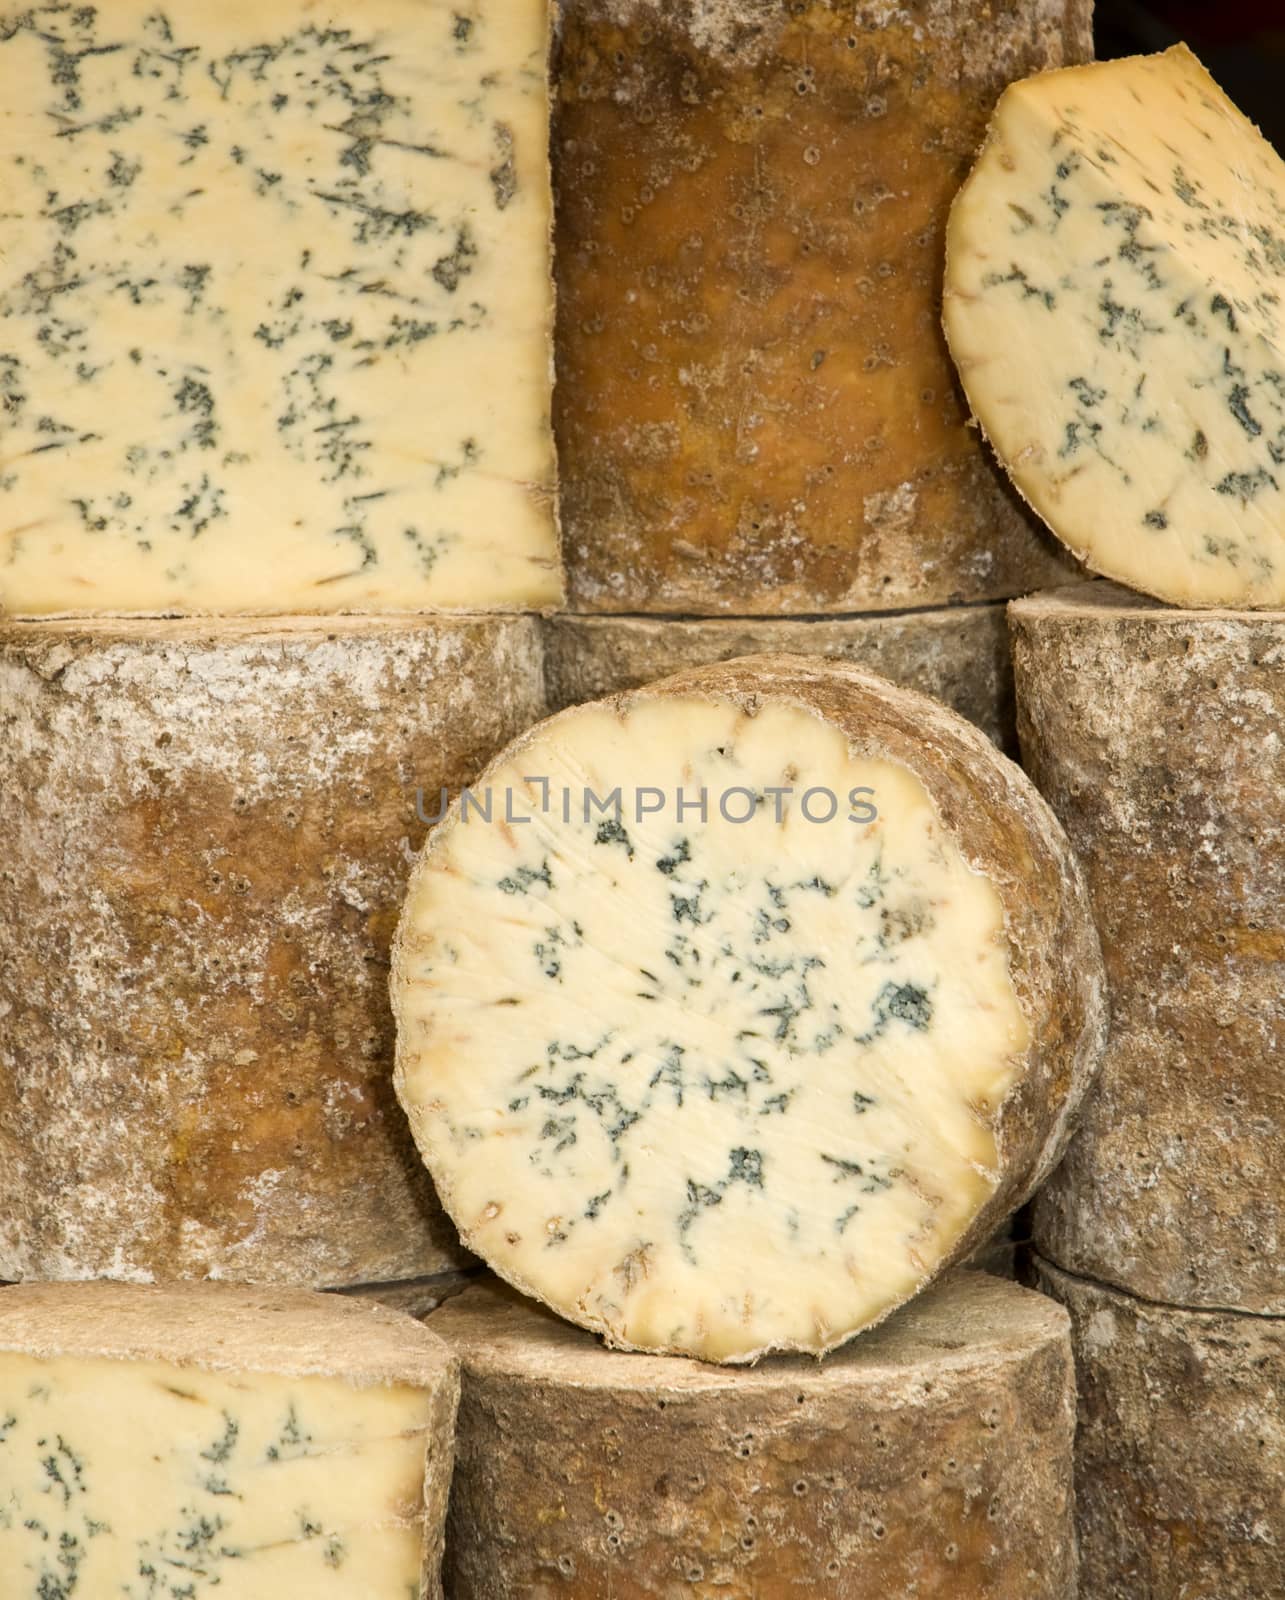 Wheels of blue cheese in a market